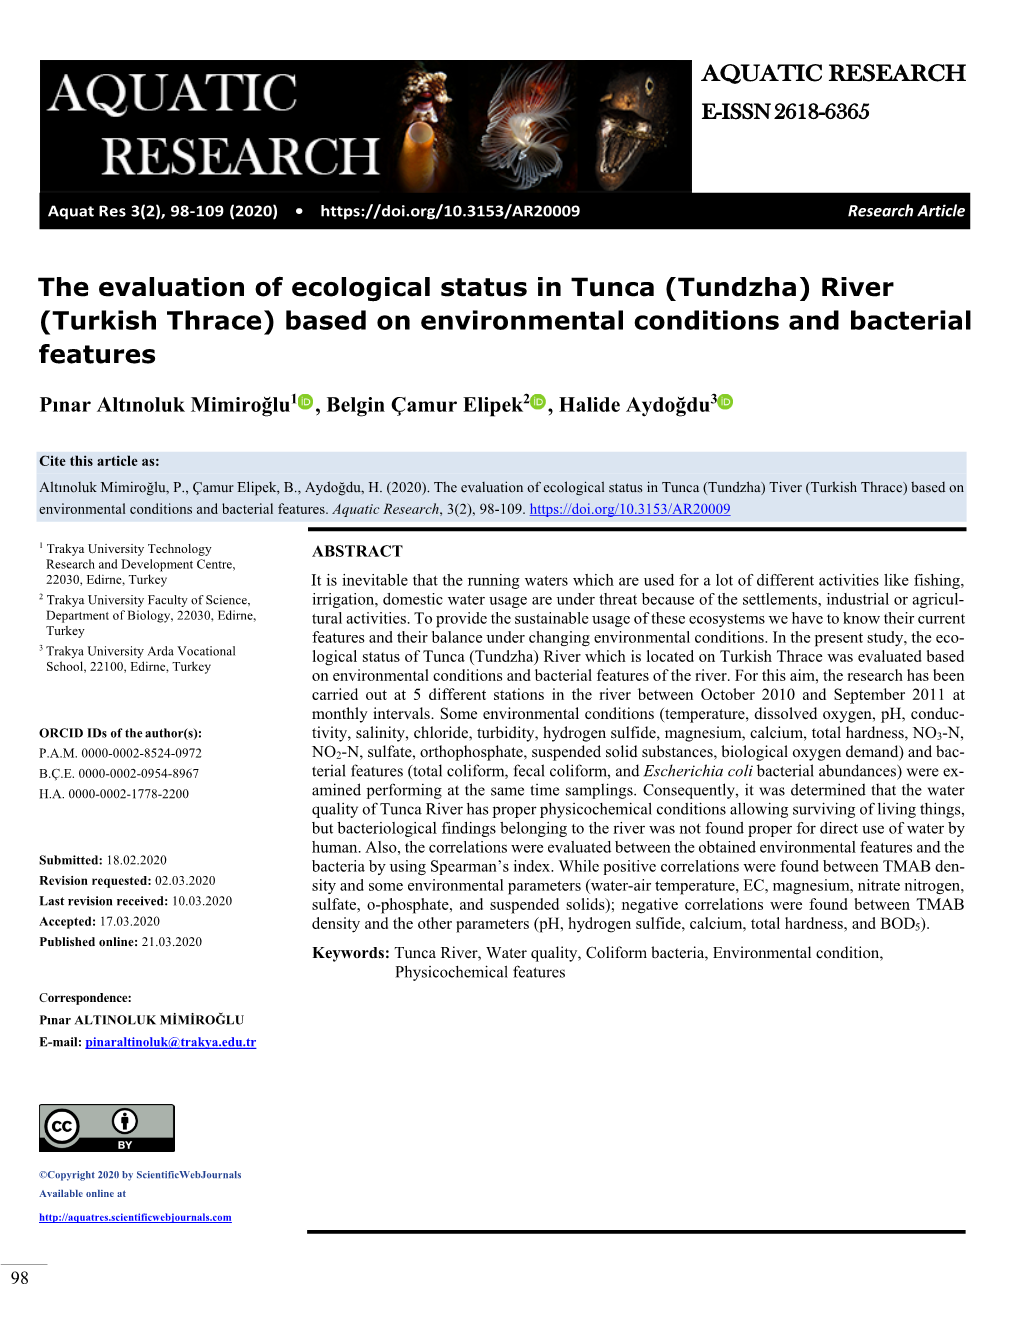 The Evaluation of Ecological Status in Tunca (Tundzha) River (Turkish Thrace) Based on Environmental Conditions and Bacterial Features